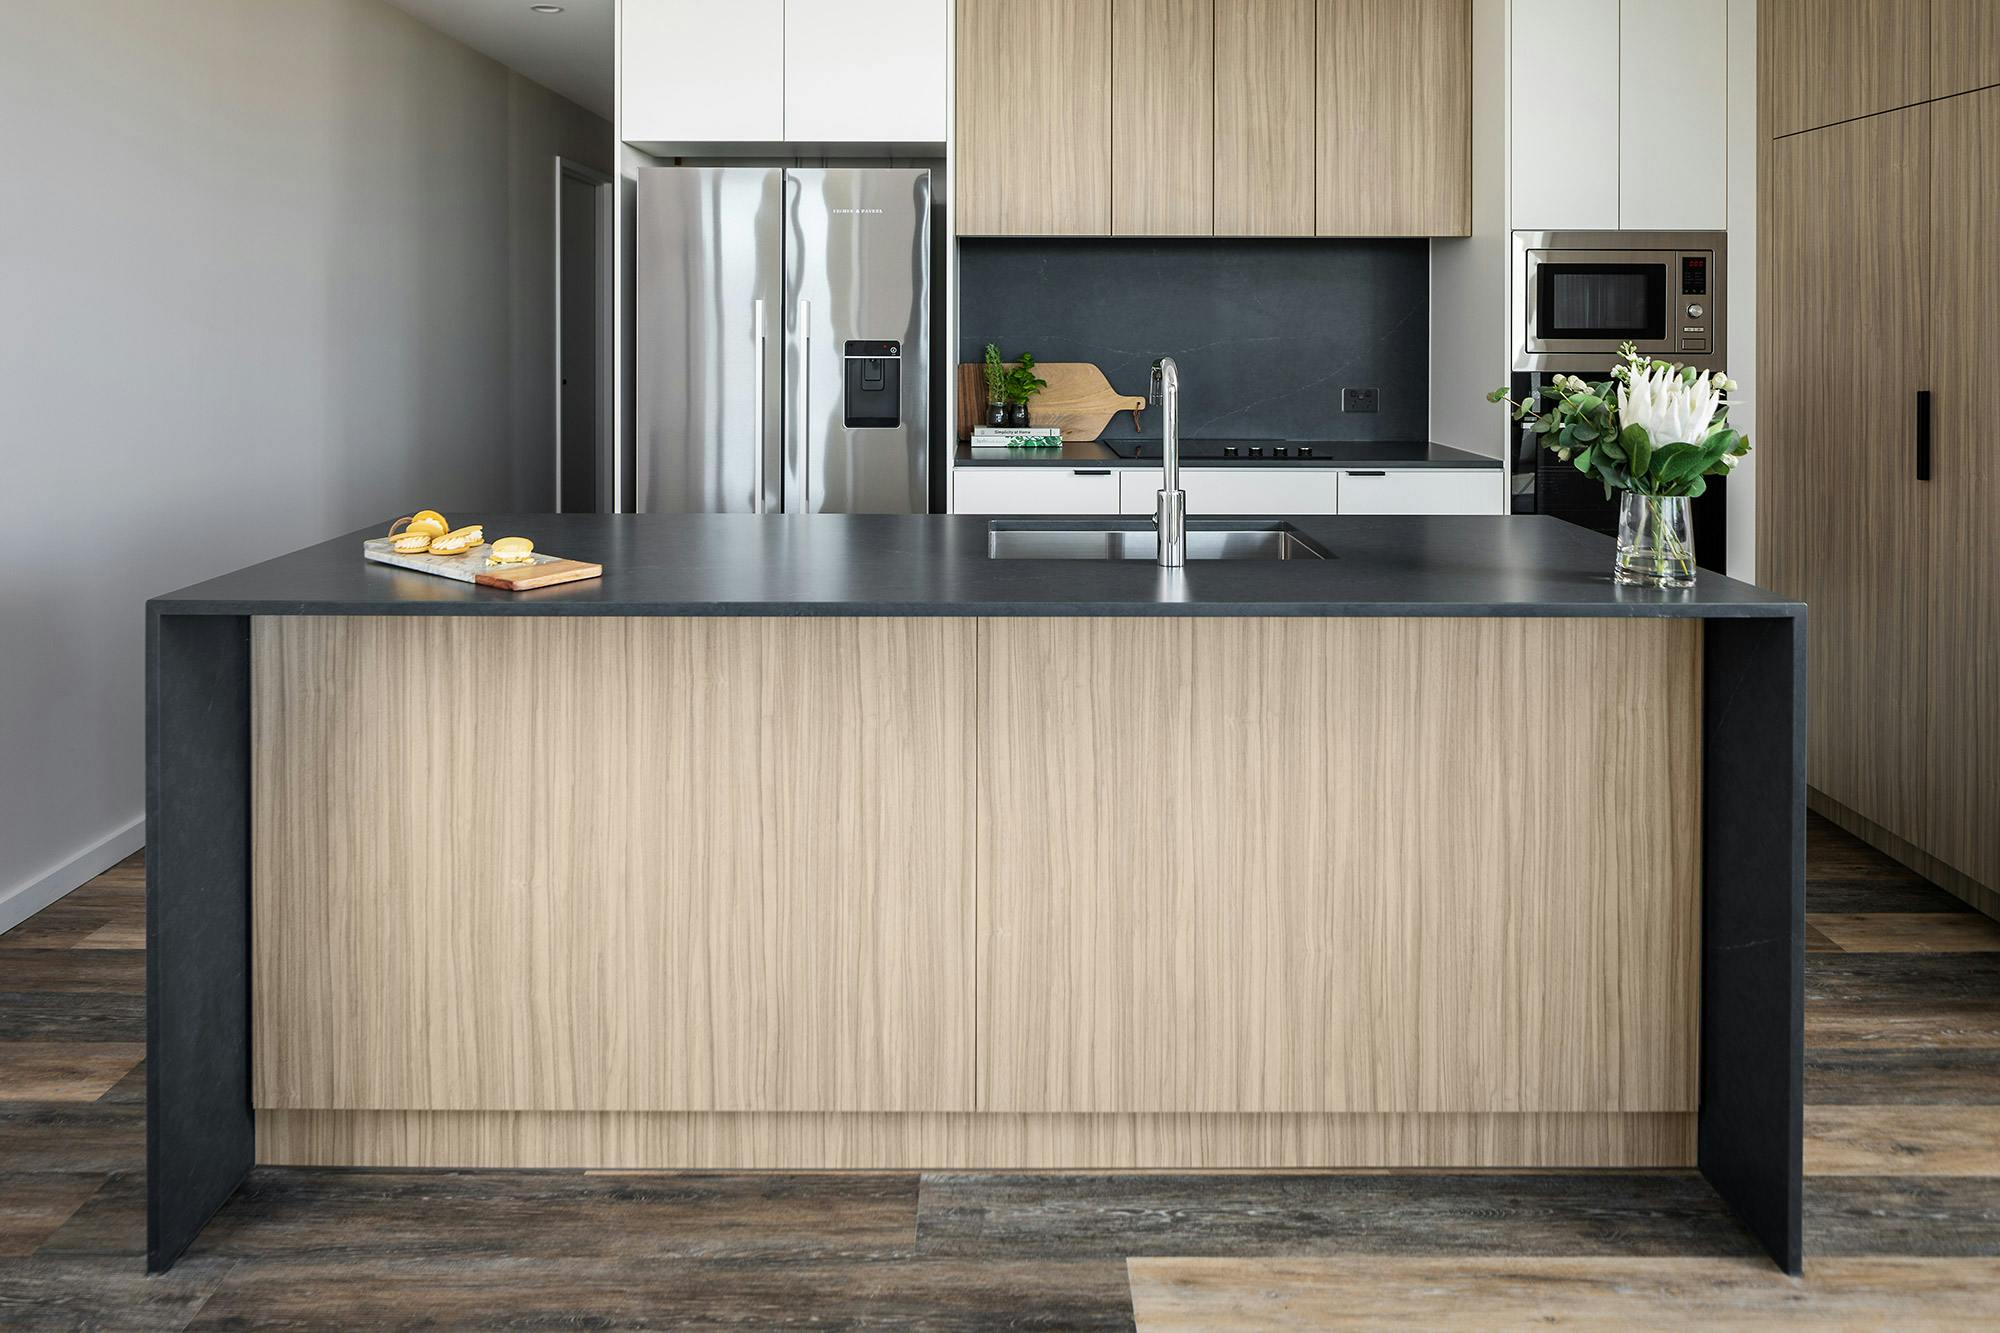 Image of ELEMENT27 cocina 1.jpg?auto=format%2Ccompress&ixlib=php 3.3 in A luxurious rental building chooses Cosentino for its durability, elegance and sustainability - Cosentino